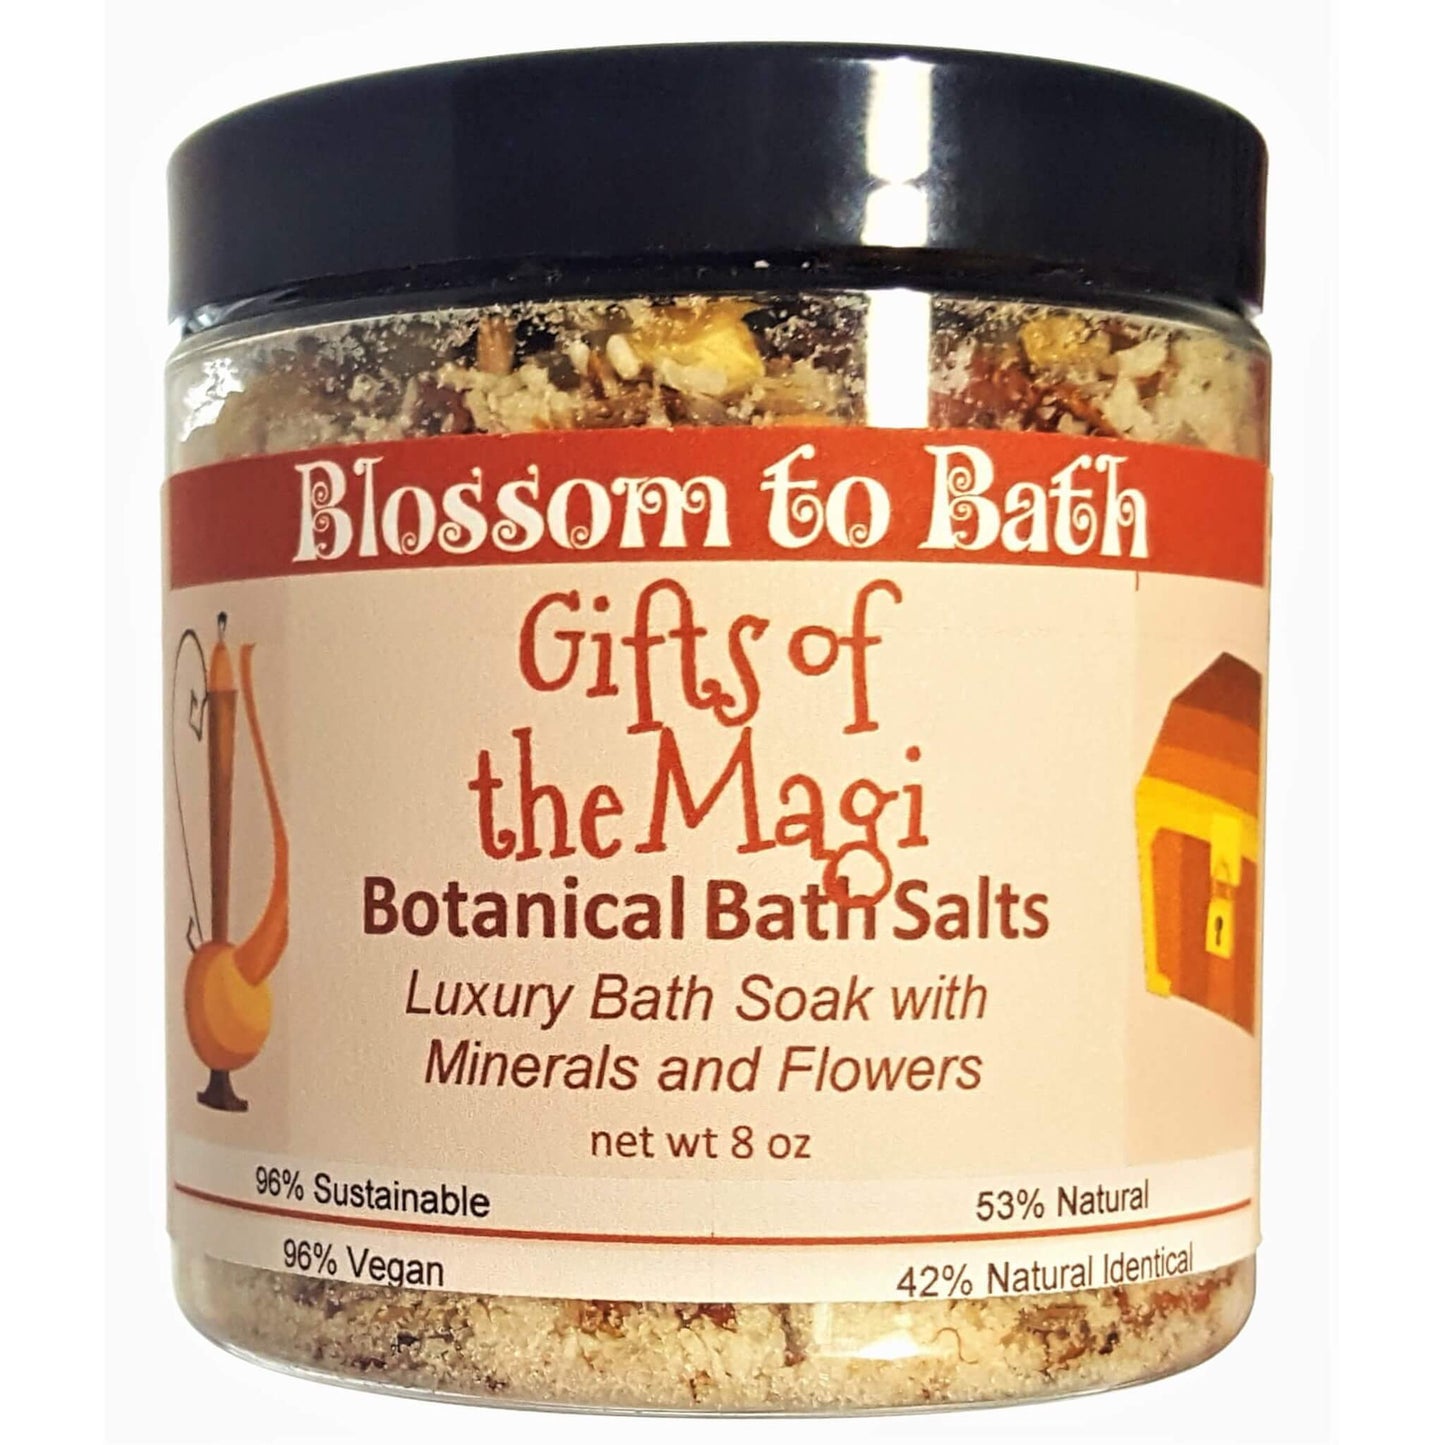 Buy Blossom to Bath Gifts of the Magi Botanical Bath Salts from Flowersong Soap Studio.  A hand selected variety of skin loving botanicals and mineral rich salts for a unique, luxurious soaking experience  Celebrate the soulful side of the holiday spirit with warm spices and incense.